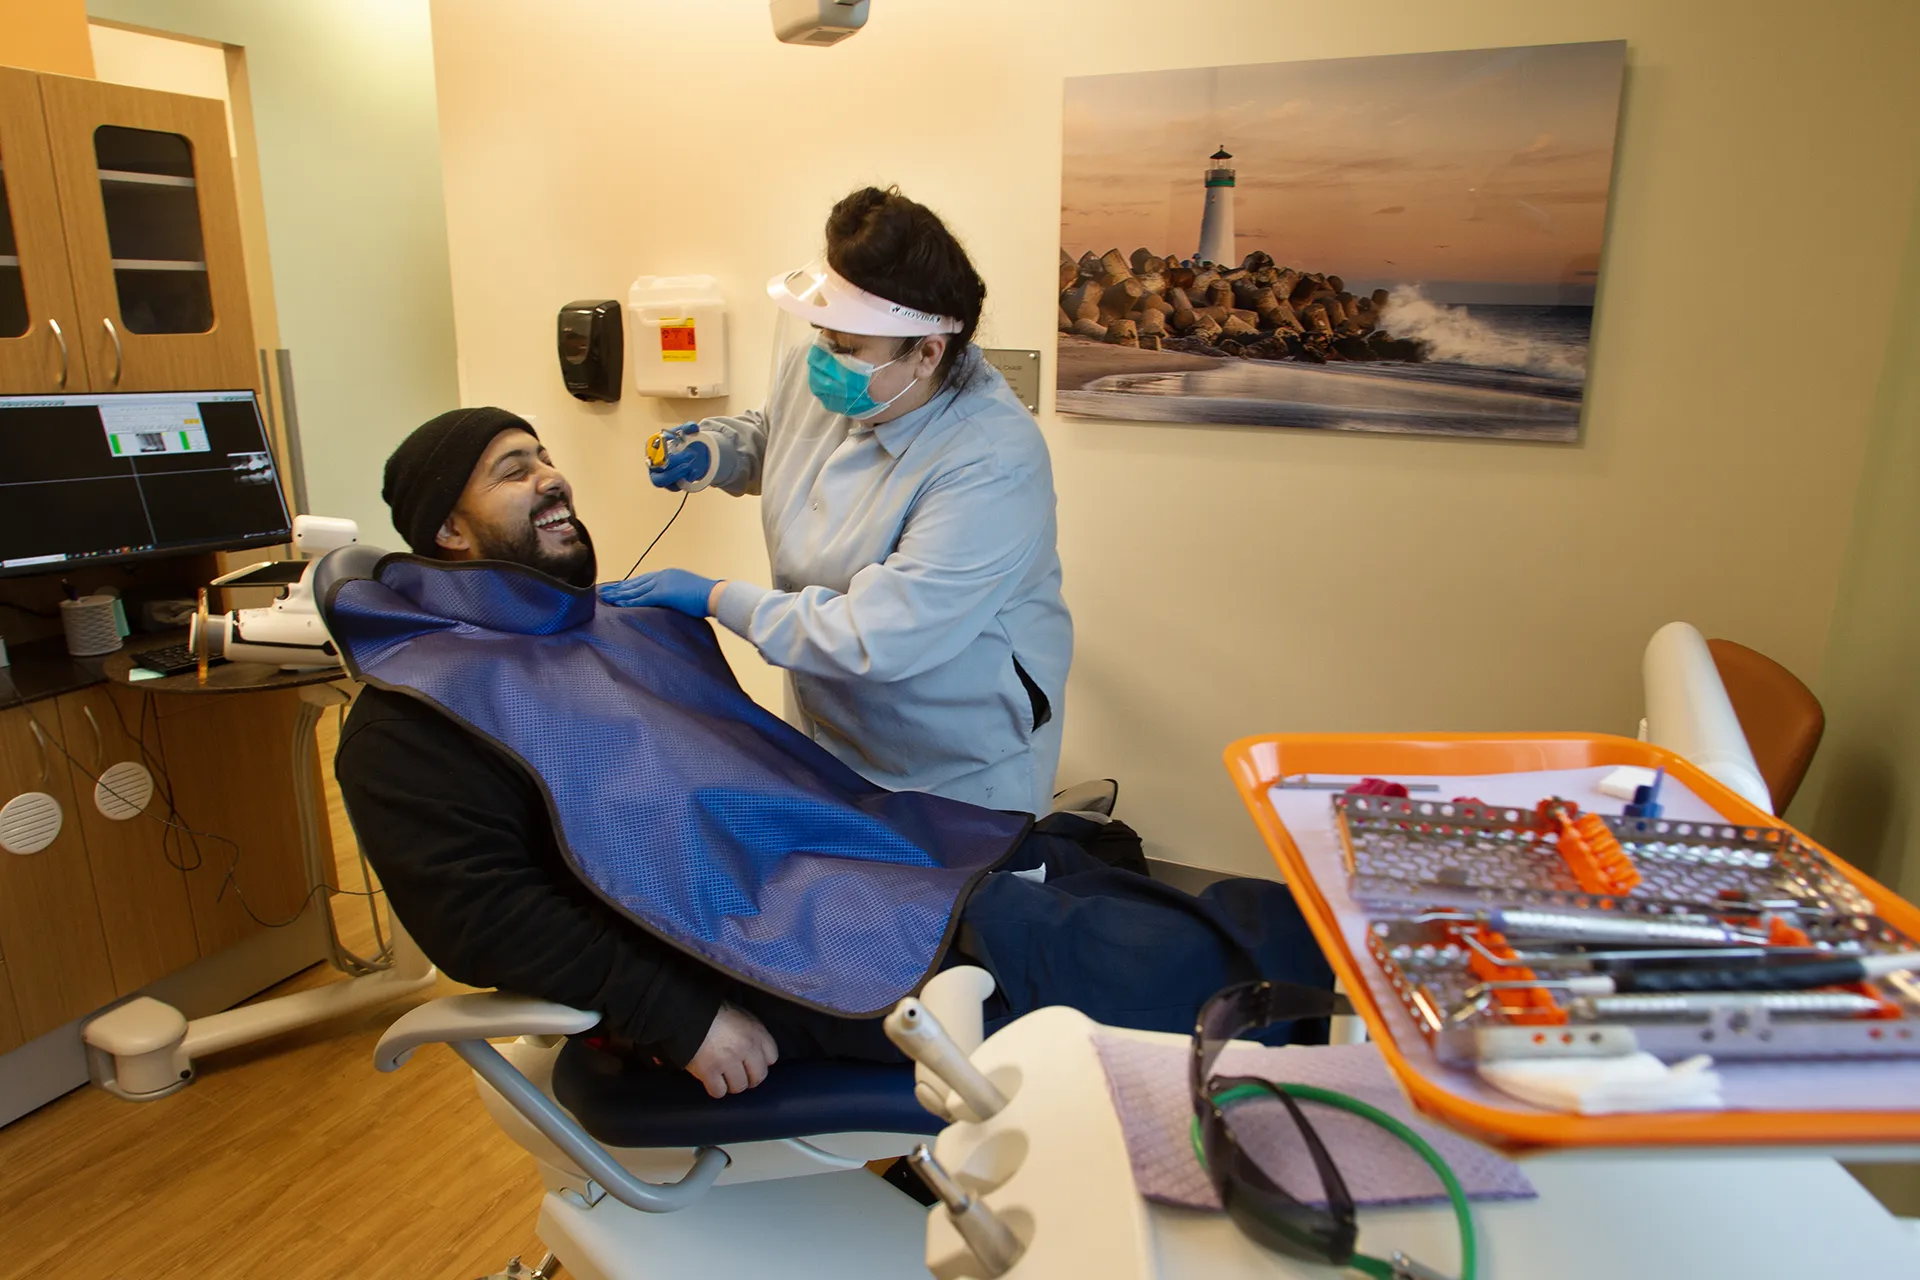 Dentist cleaning patients teeth